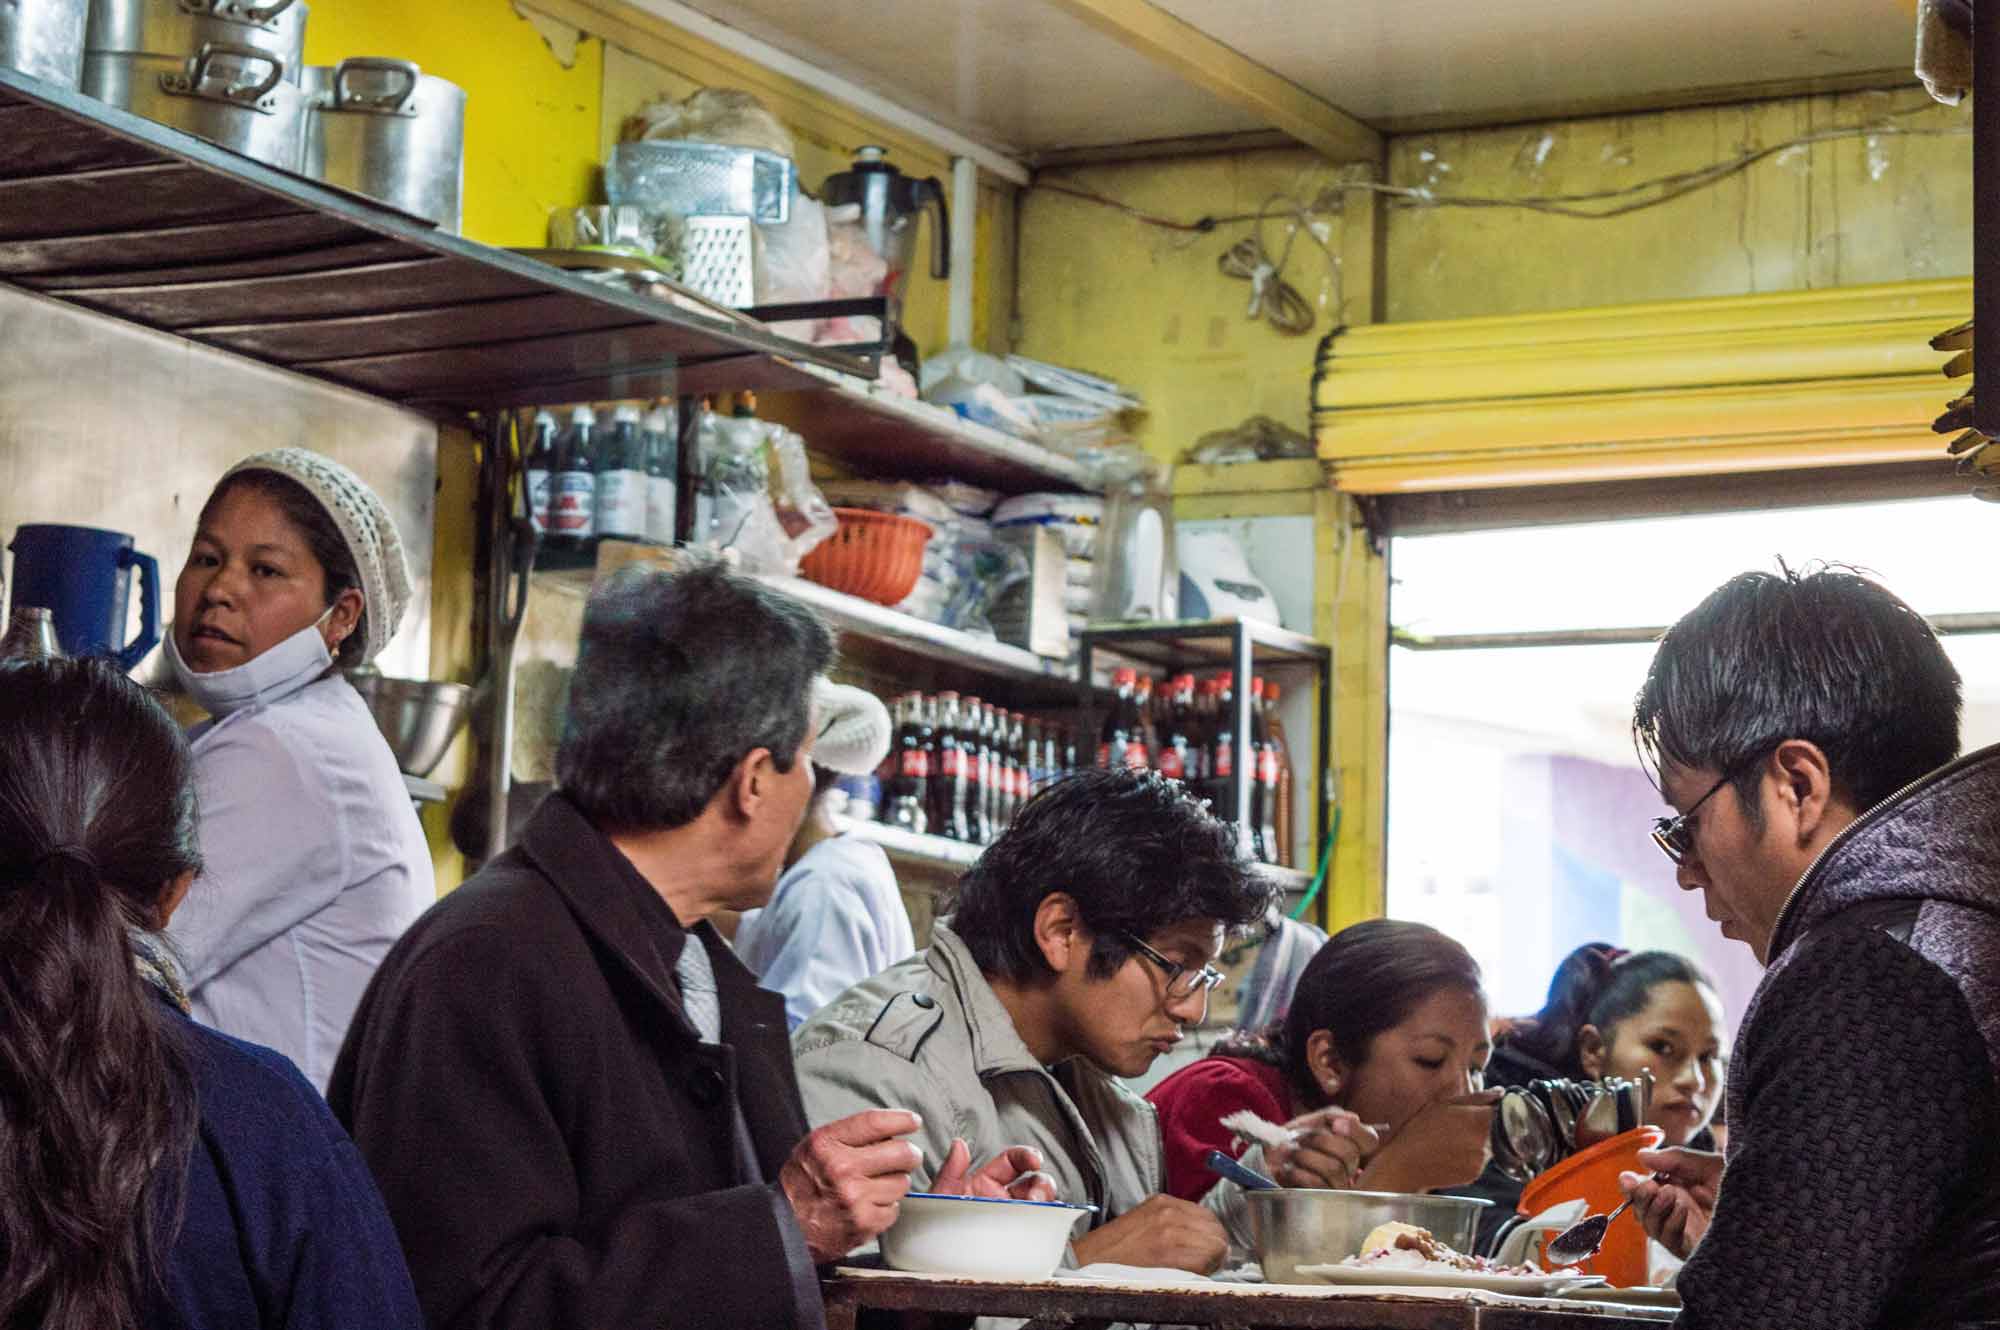 Local diners eating in the Mercado Lanza in La Paz, a great opportunity to meet local people and spend your money in a responsible tourism fashion